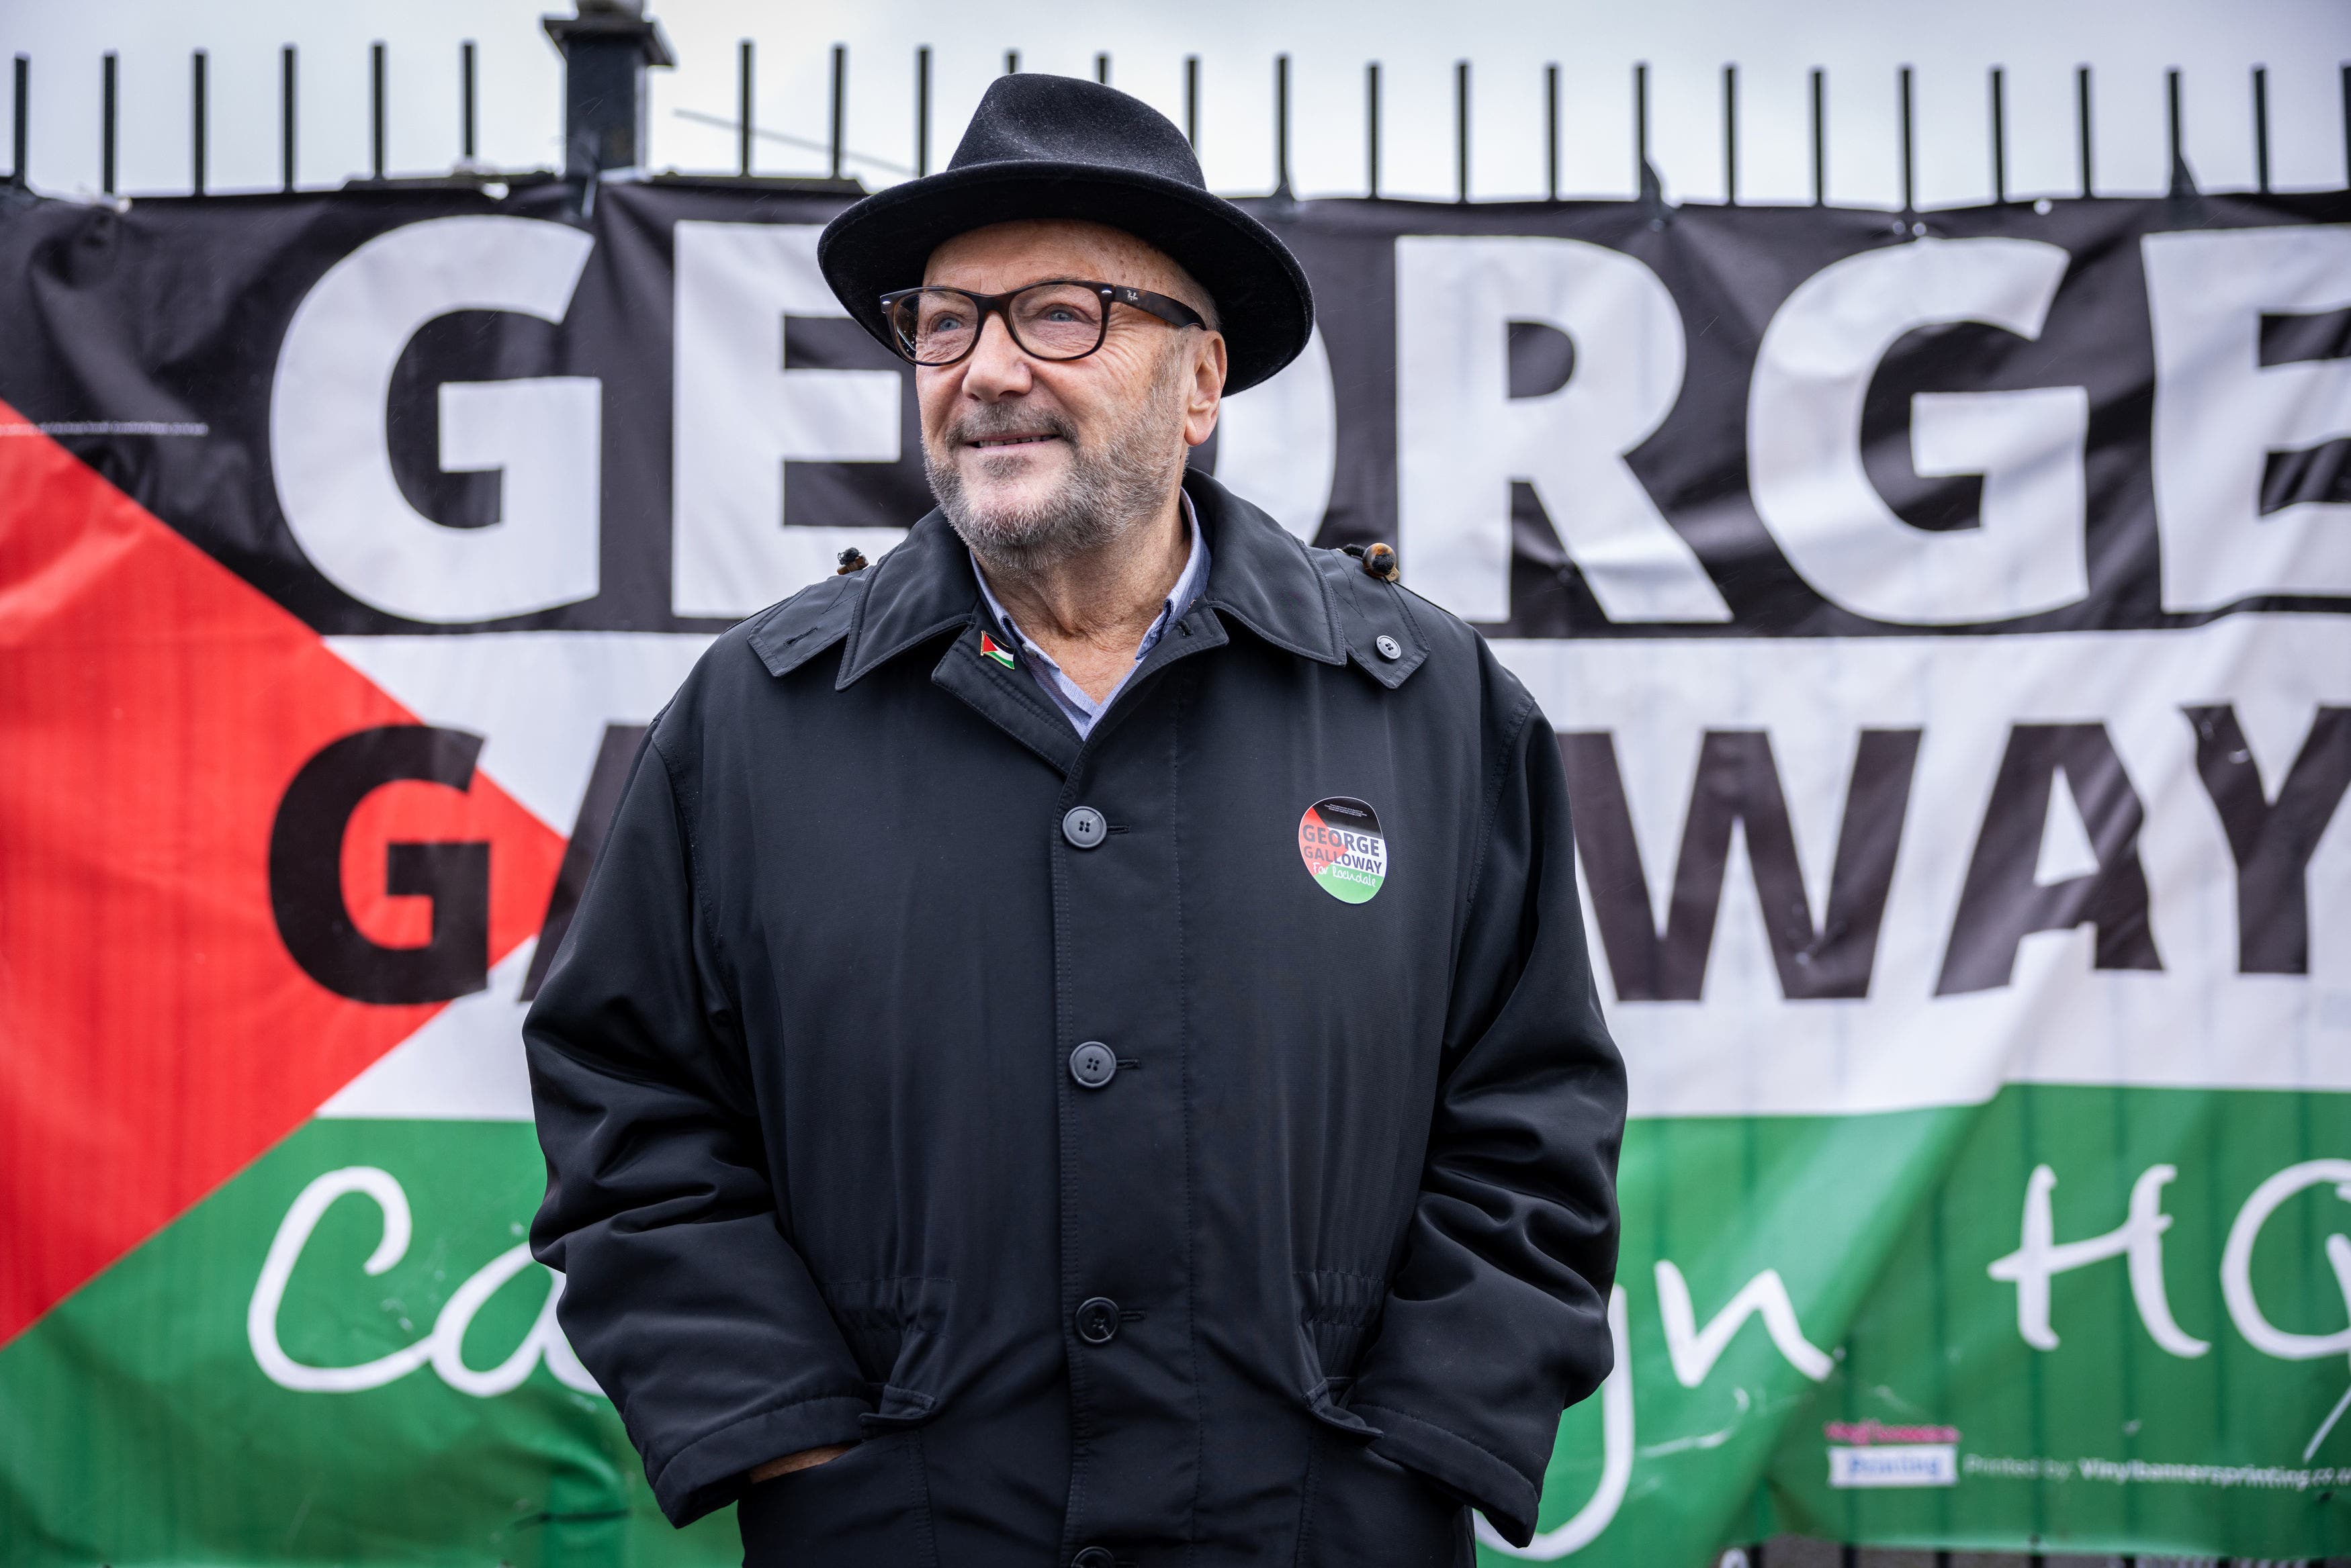 Has Labour’s Rochdale debacle gifted George Galloway an open goal?